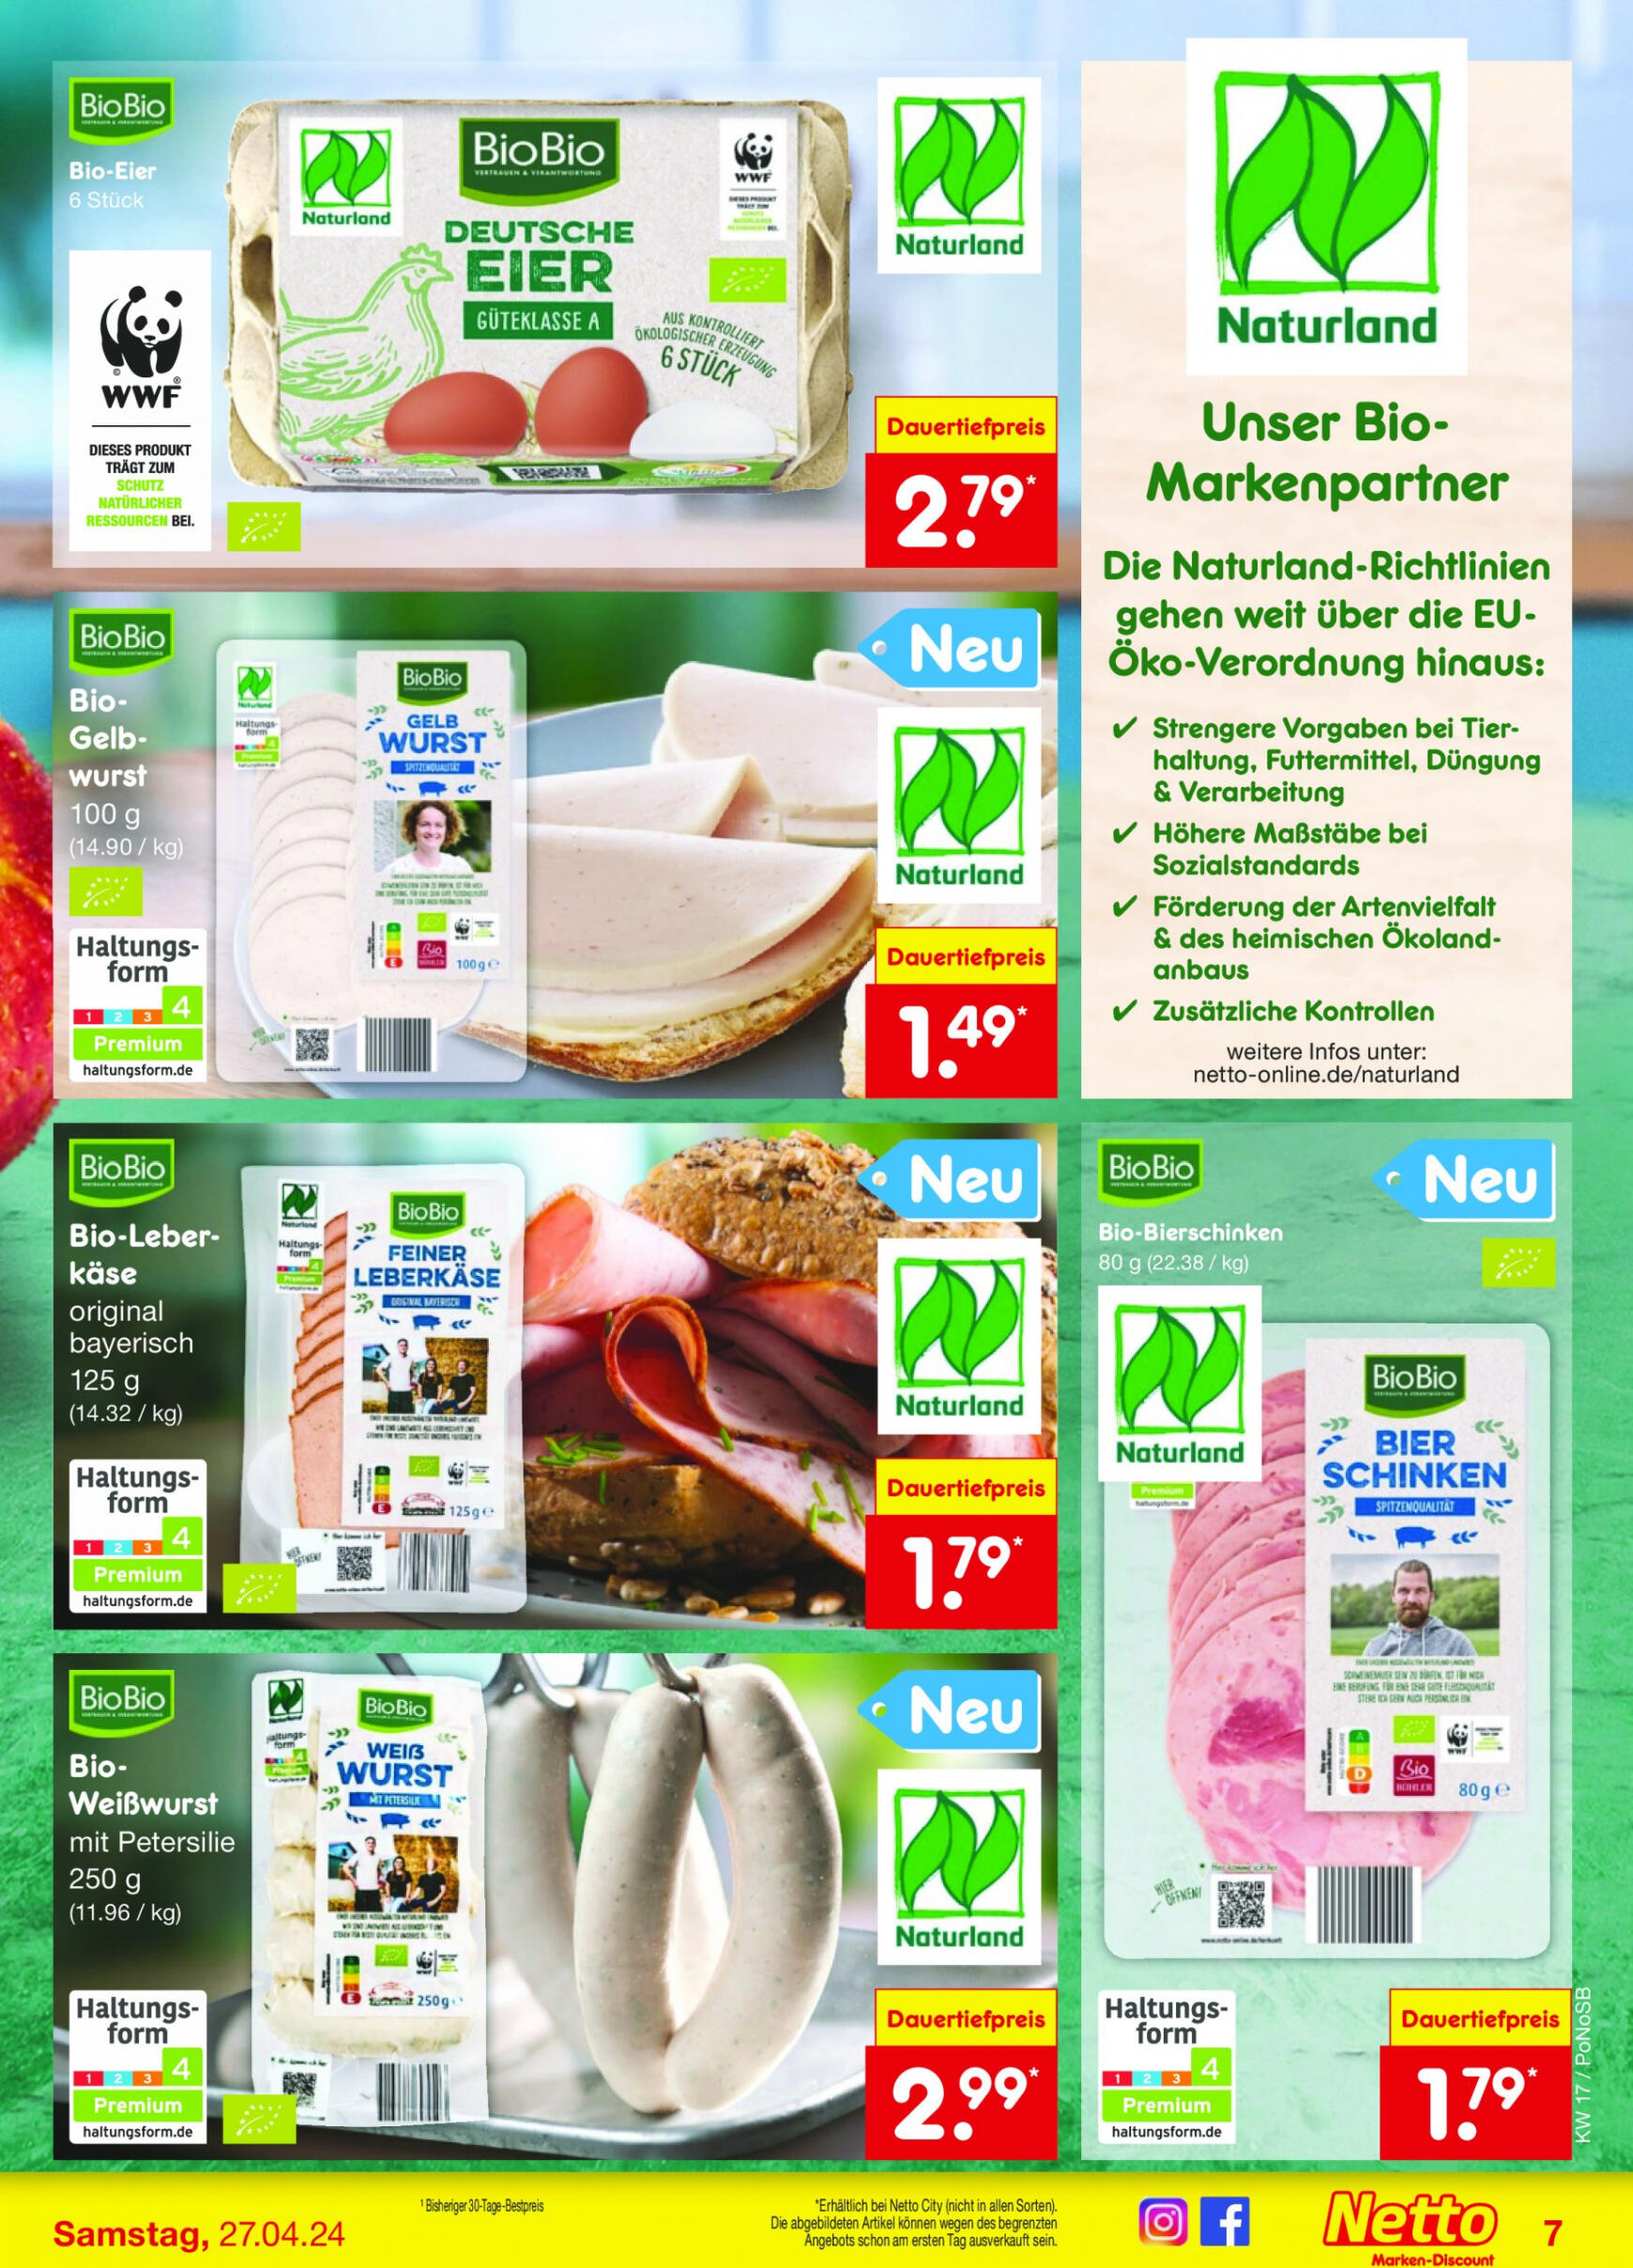 netto - Flyer Netto aktuell 22.04. - 27.04. - page: 7